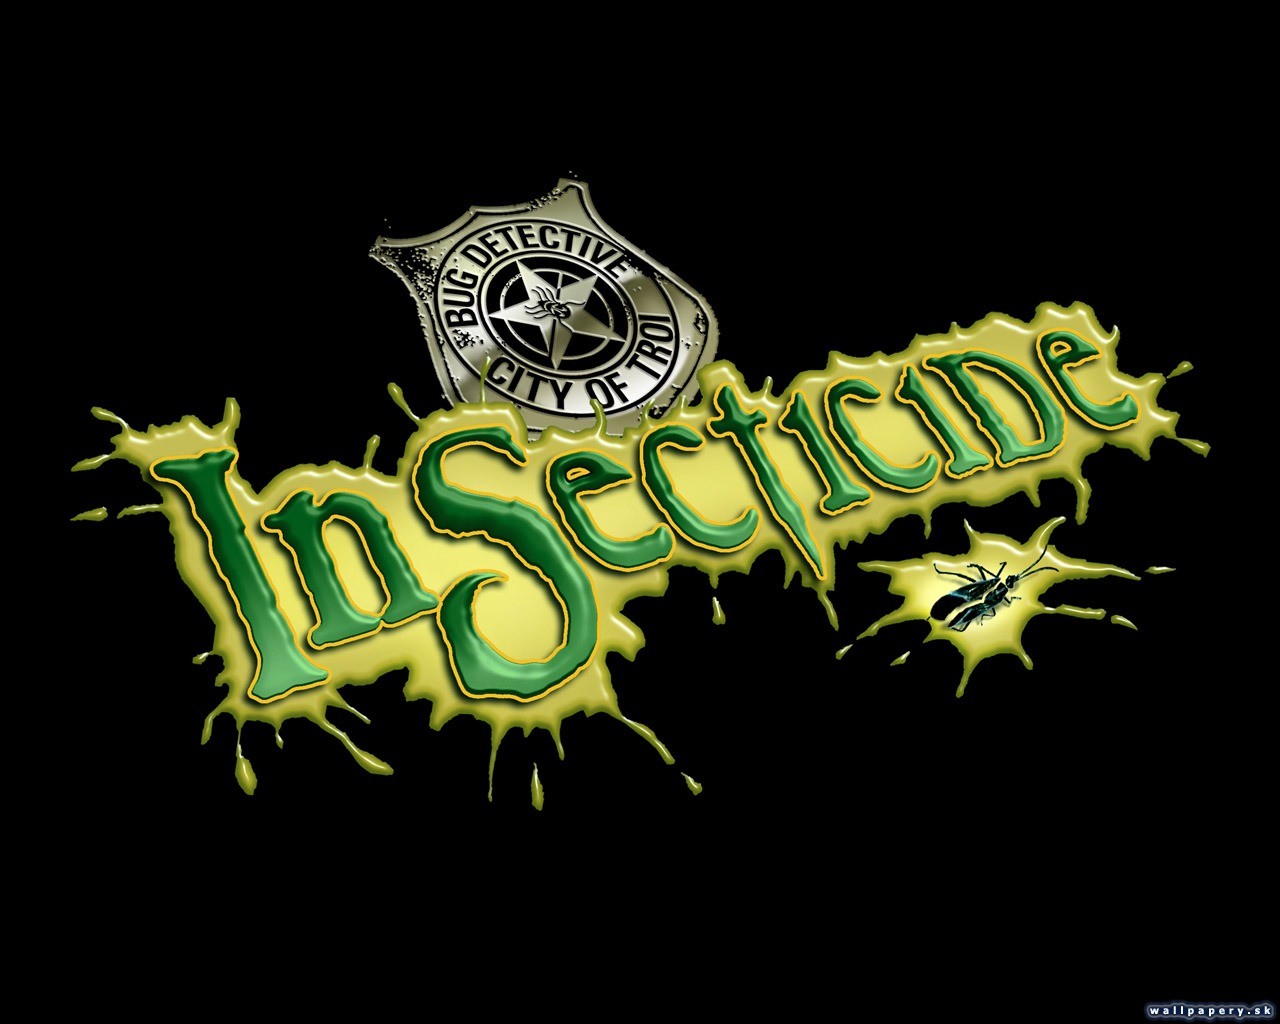 Insecticide - wallpaper 3